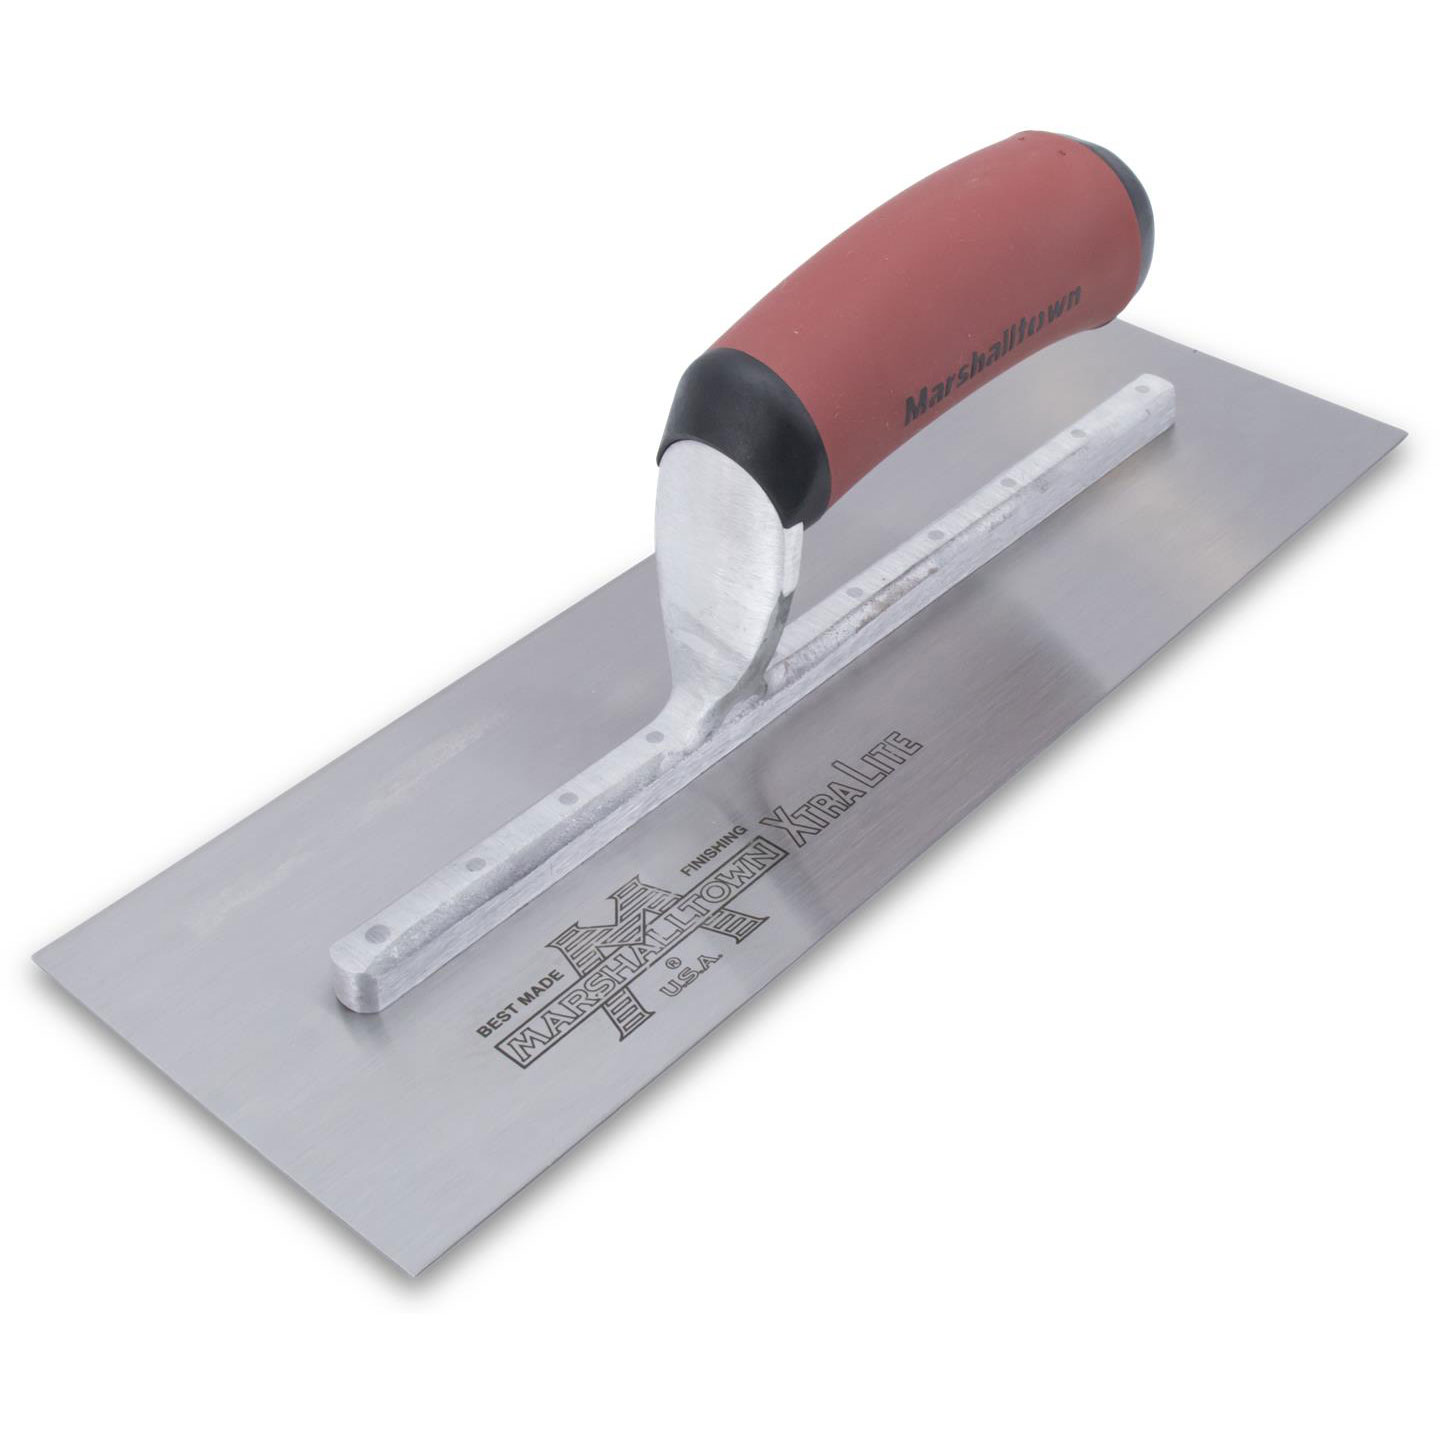 Marshalltown MXS58D 14in x 3-1/2in Finishing Trowel with Curved DuraSoft Handle MXS58D